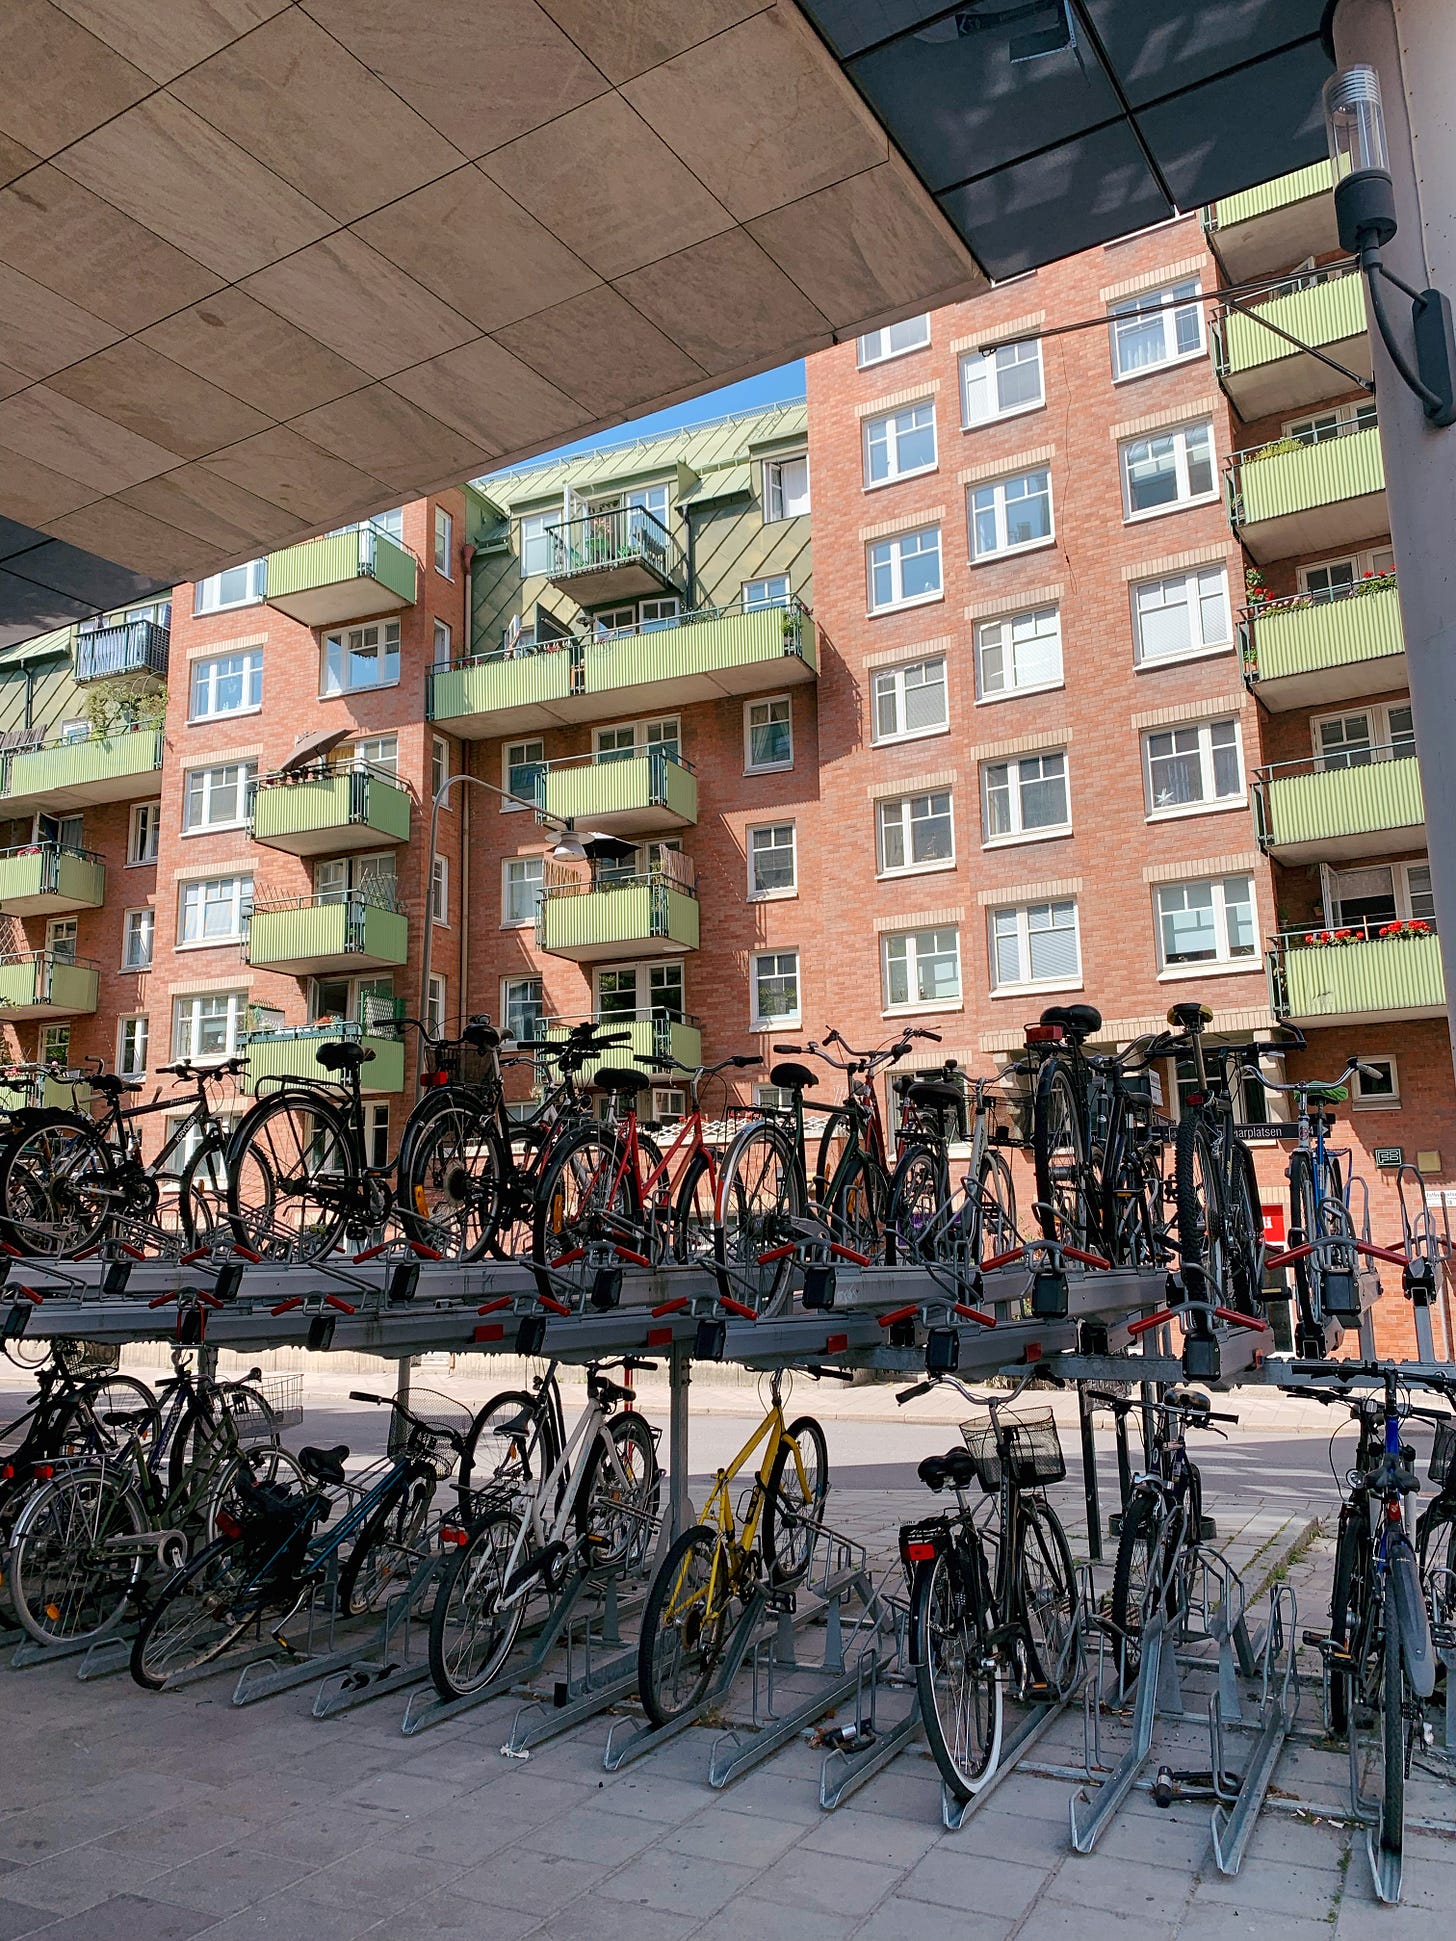 Bike rack with tons of bikes on it